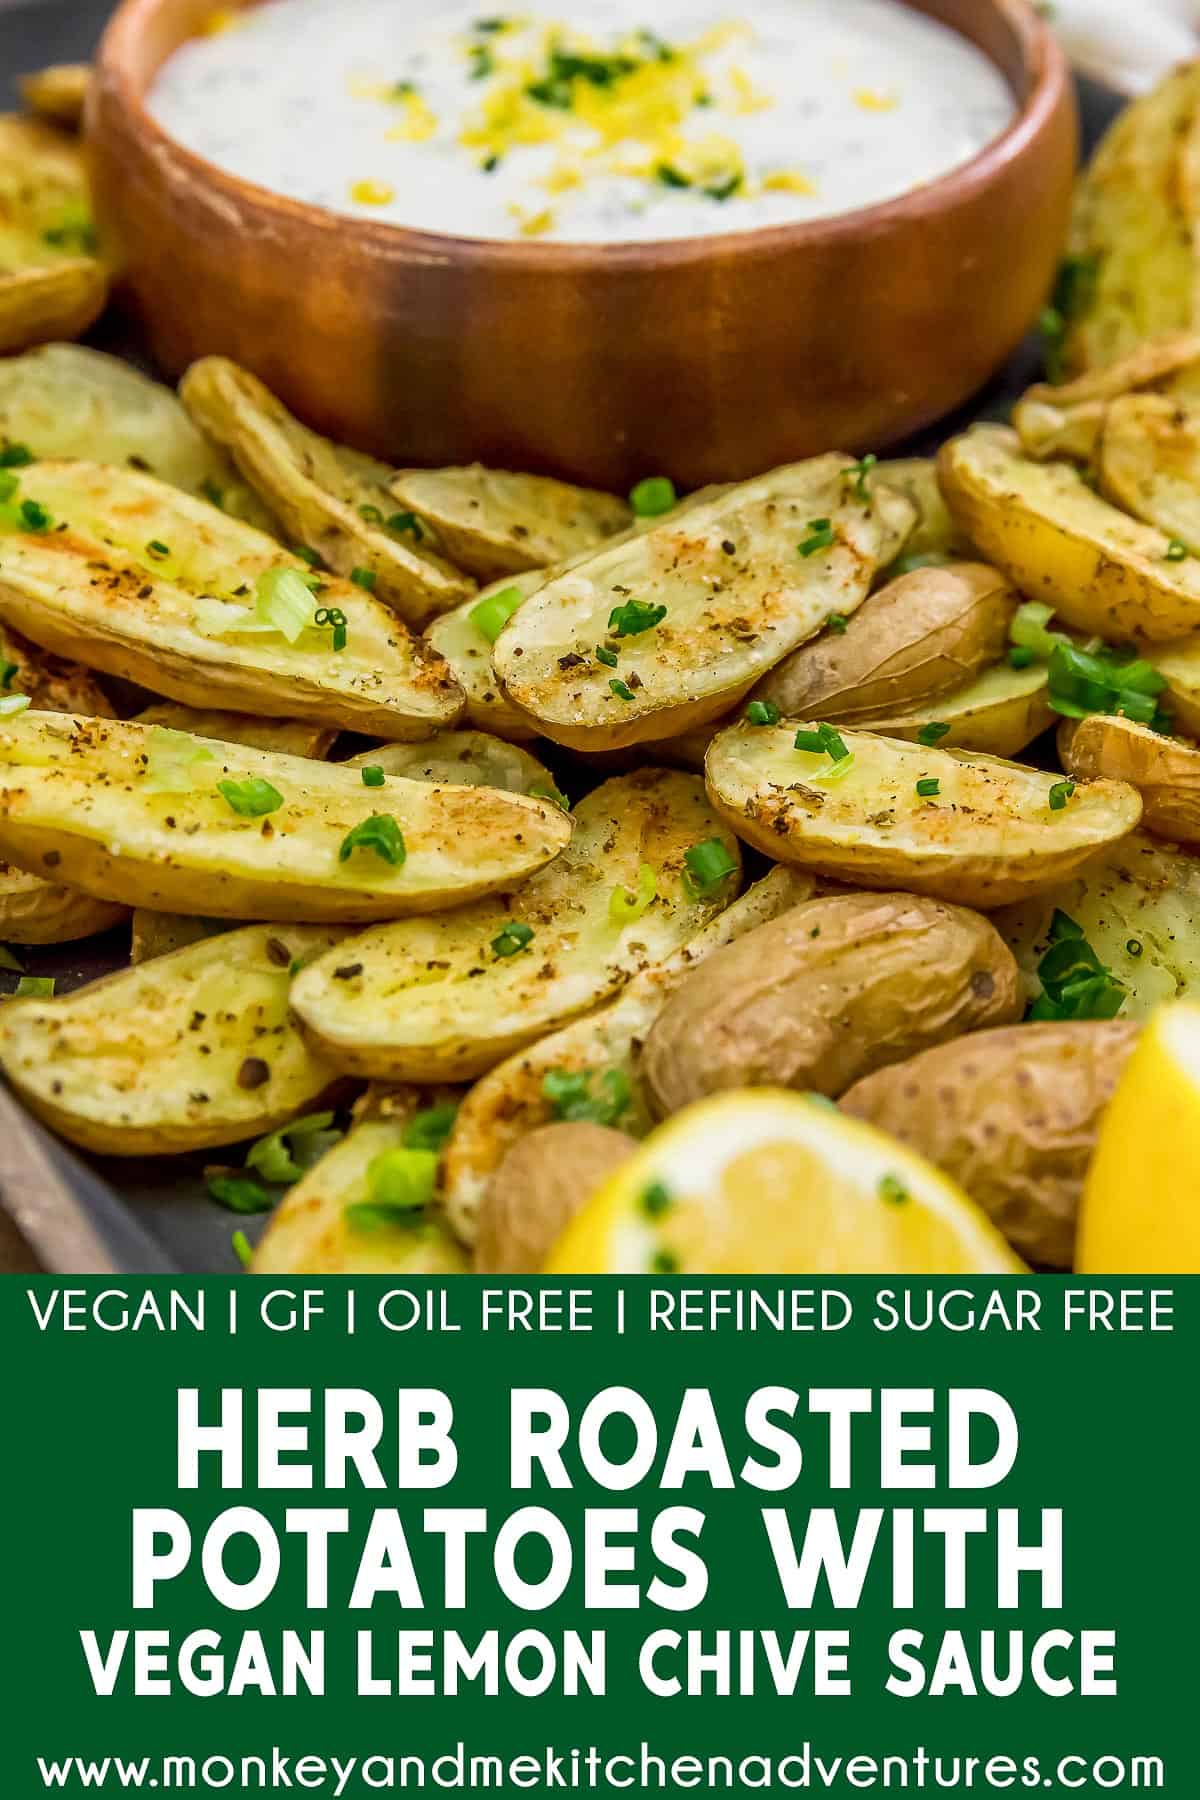 Herb Roasted Potatoes with Vegan Lemon Chive Sauce with text description